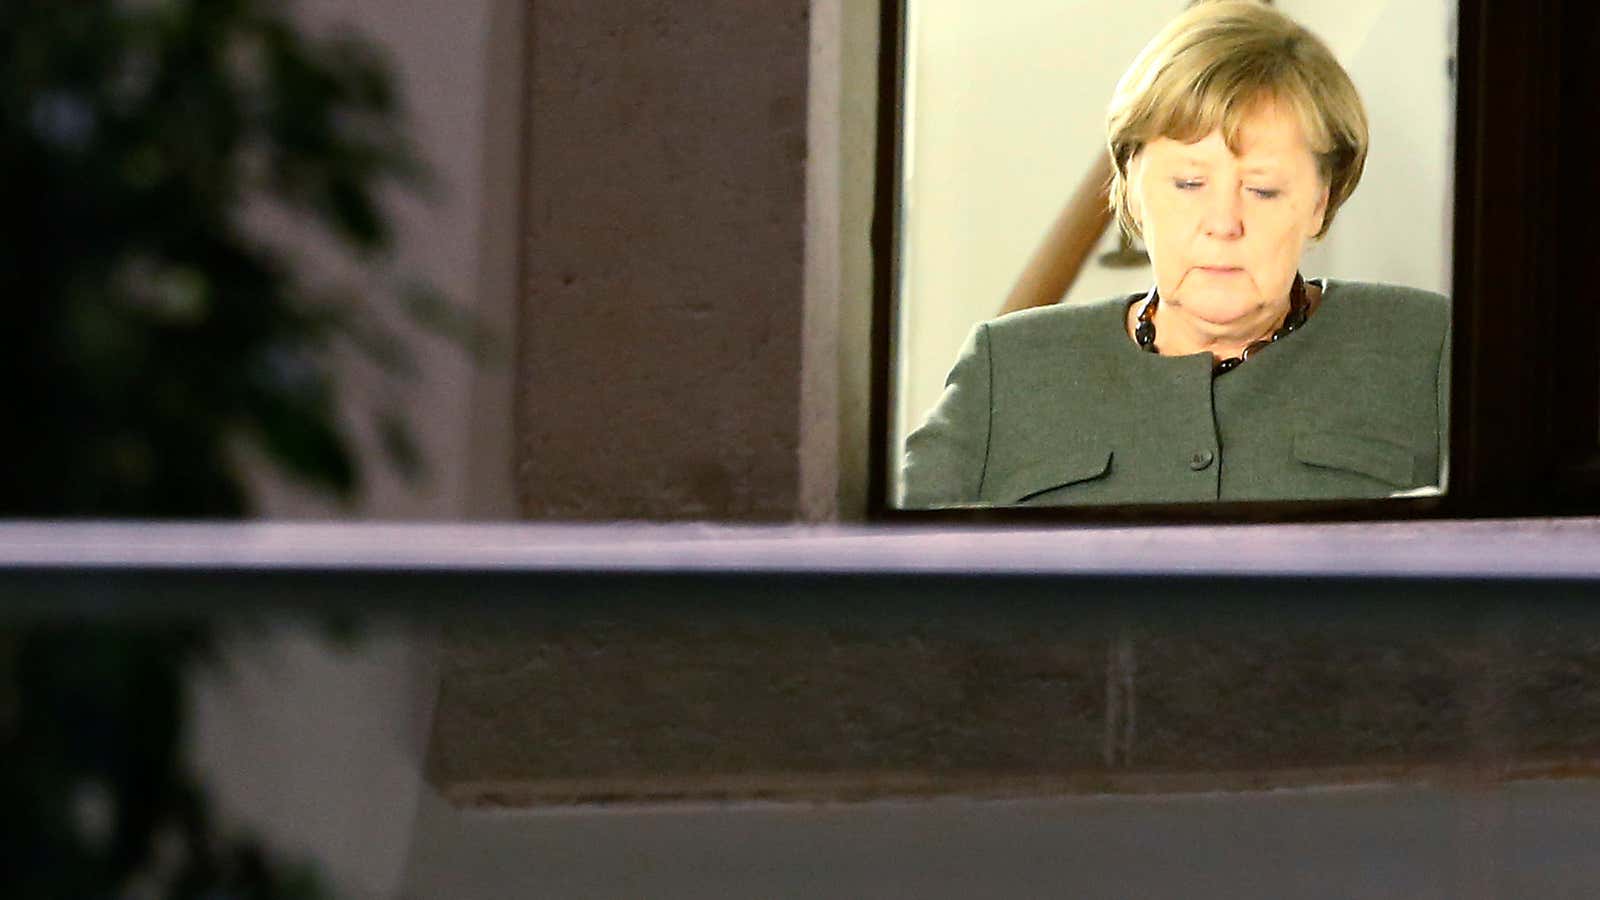 It’s been a hard day’s night for Angela Merkel